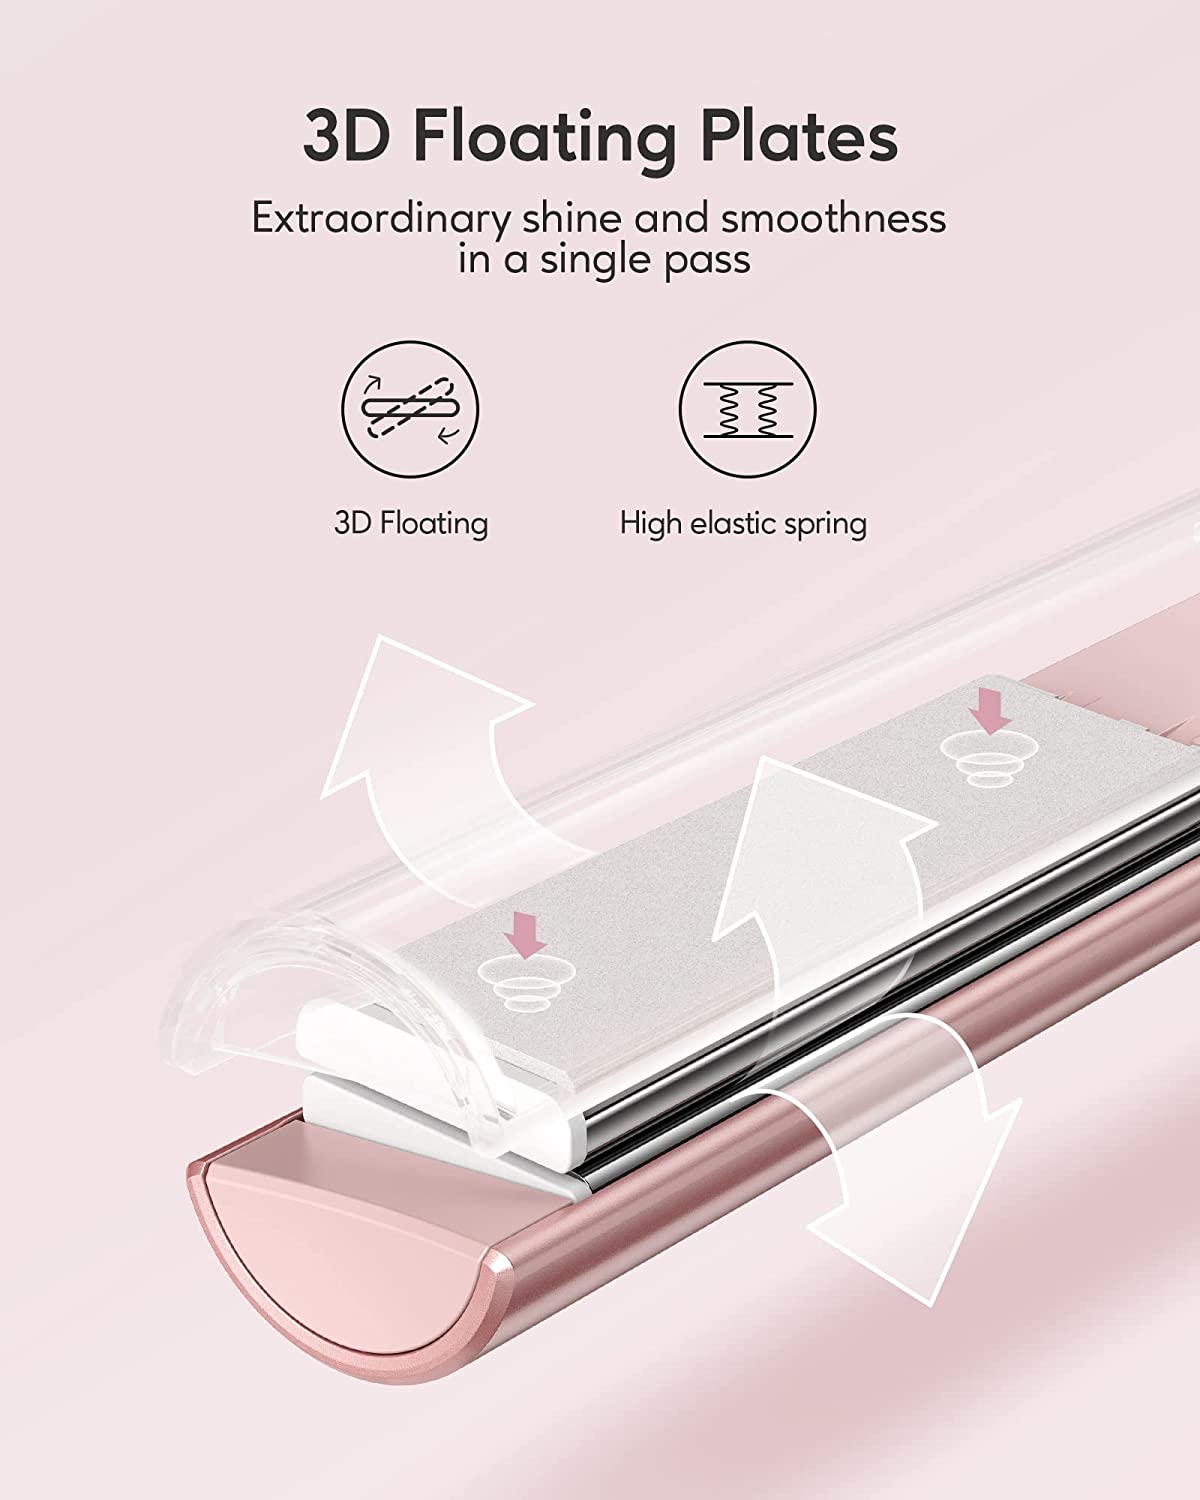 V7 2-in-1 Flat and Curling Iron